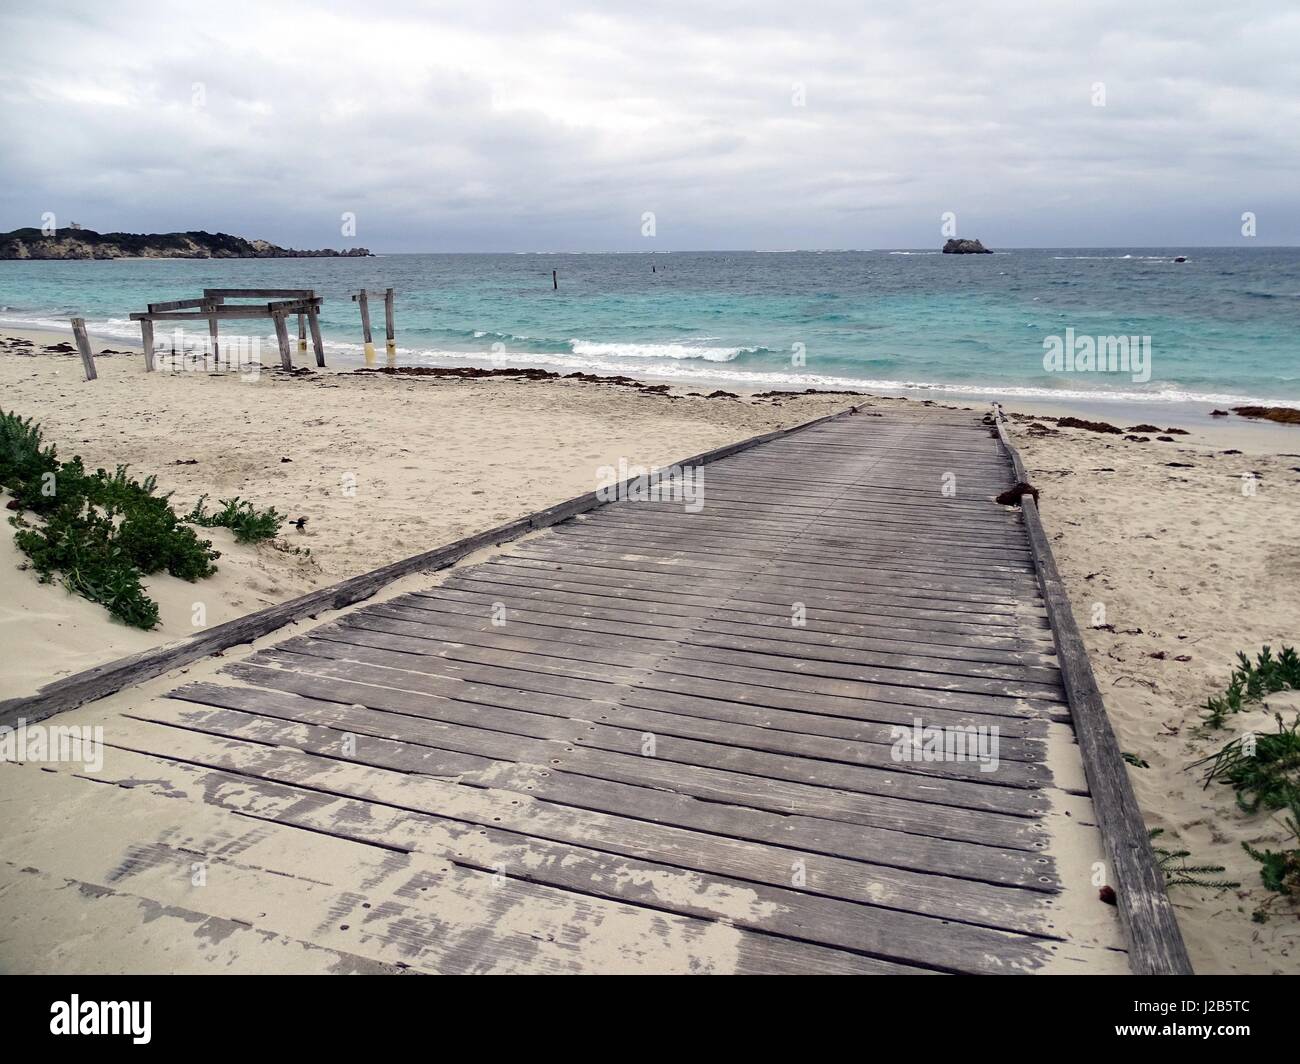 A wooden boat ramp on a beach in Western Australia Stock Photo